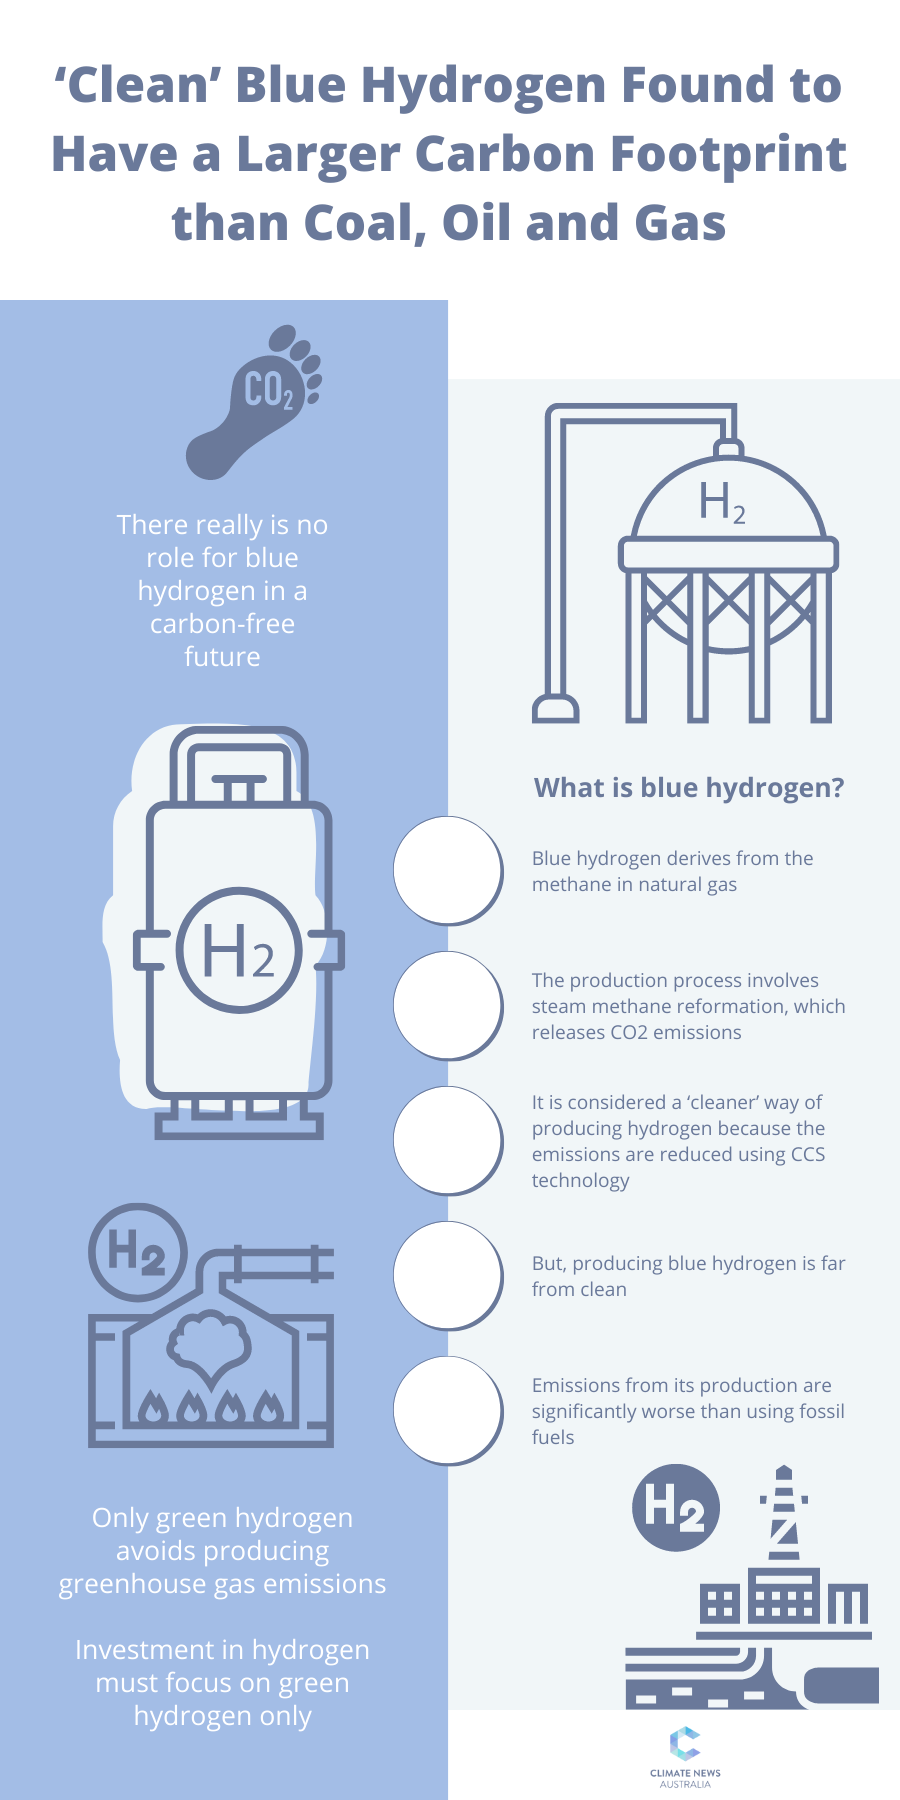 ‘Clean’ Blue Hydrogen Found to Have a Larger Carbon Footprint than Coal, Oil and Gas